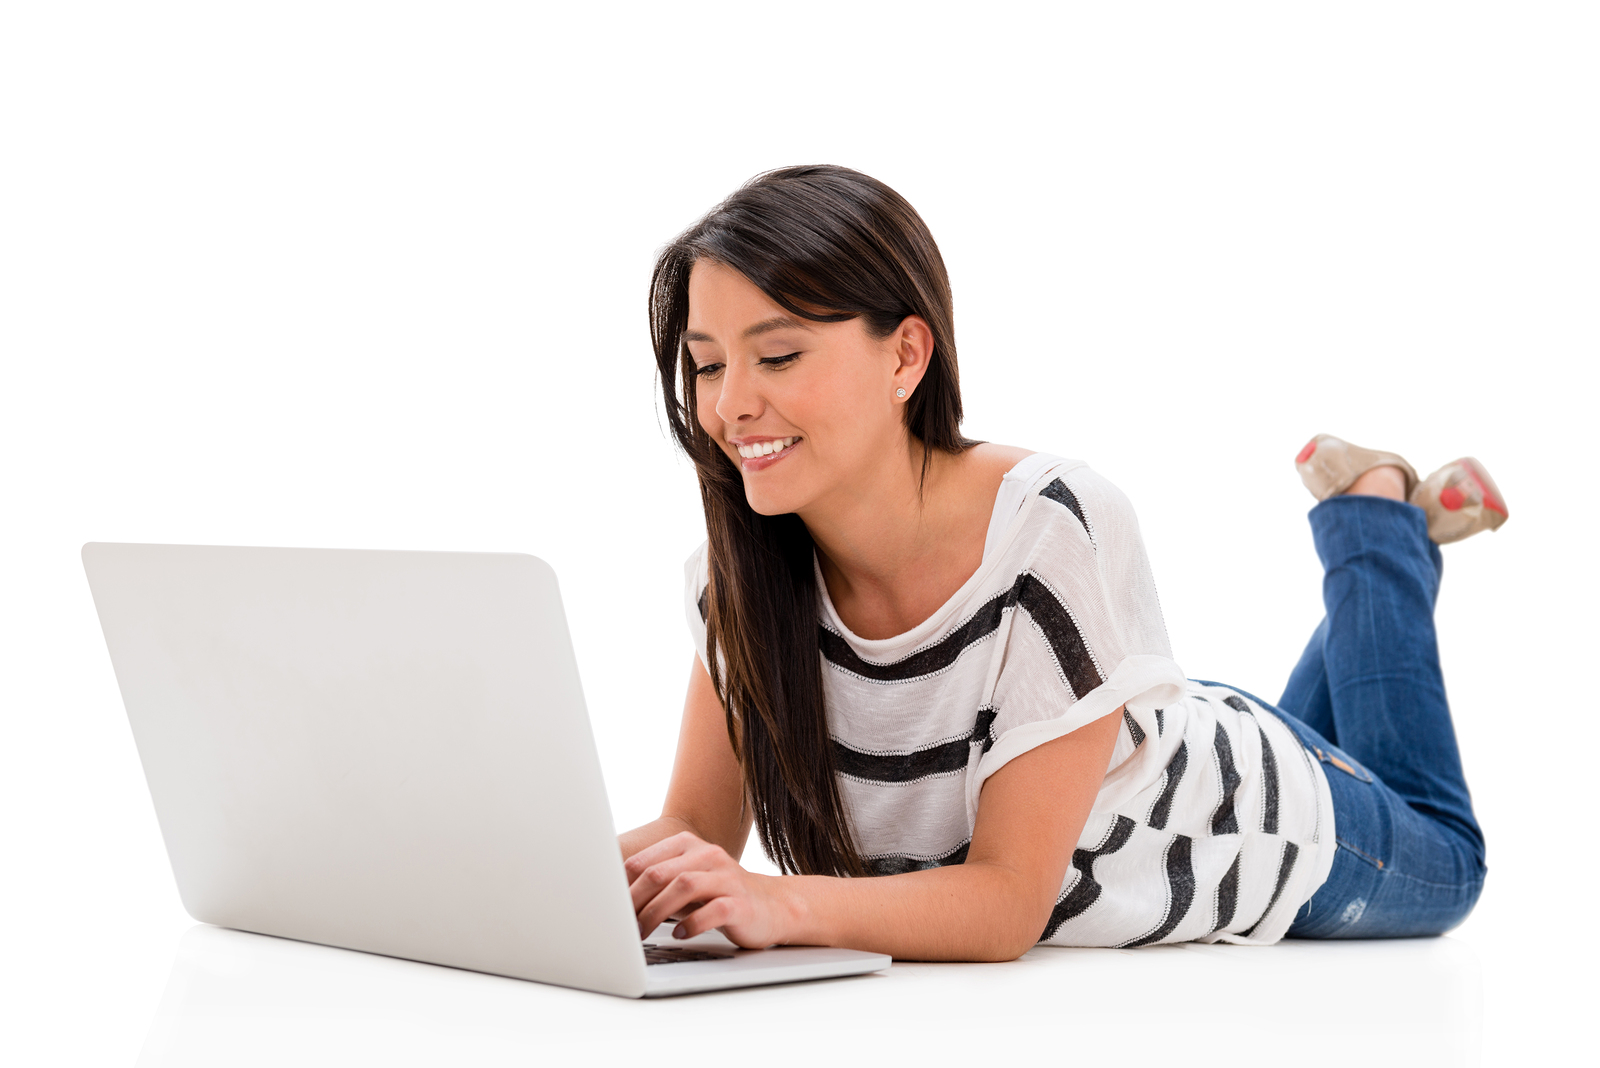 Happy woman working on a laptop computer - isolated over white background